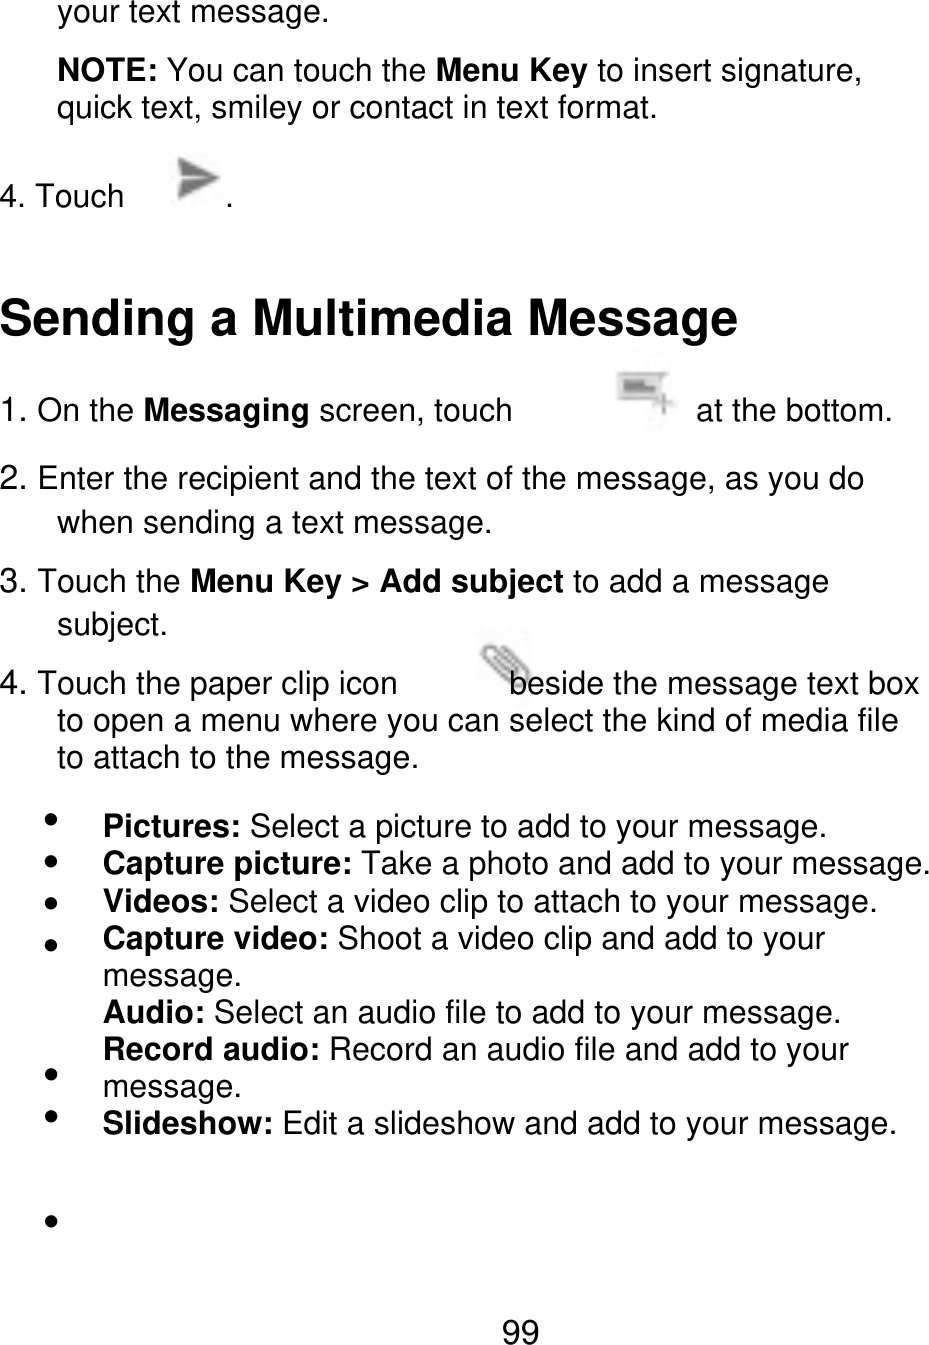 your text message. NOTE: You can touch the Menu Key to insert signature, quick text, smiley or contact in text format. 4. Touch . Sending a Multimedia Message 1. On the Messaging screen, touch when sending a text message. at the bottom. 2. Enter the recipient and the text of the message, as you do 3. Touch the Menu Key &gt; Add subject to add a message subject. 4. Touch the paper clip icon                                    beside the message text box to open a menu where you can select the kind of media file to attach to the message. Pictures: Select a picture to add to your message. Capture picture: Take a photo and add to your message. Videos: Select a video clip to attach to your message. Capture video: Shoot a video clip and add to your message. Audio: Select an audio file to add to your message. Record audio: Record an audio file and add to your message. Slideshow: Edit a slideshow and add to your message. 99 